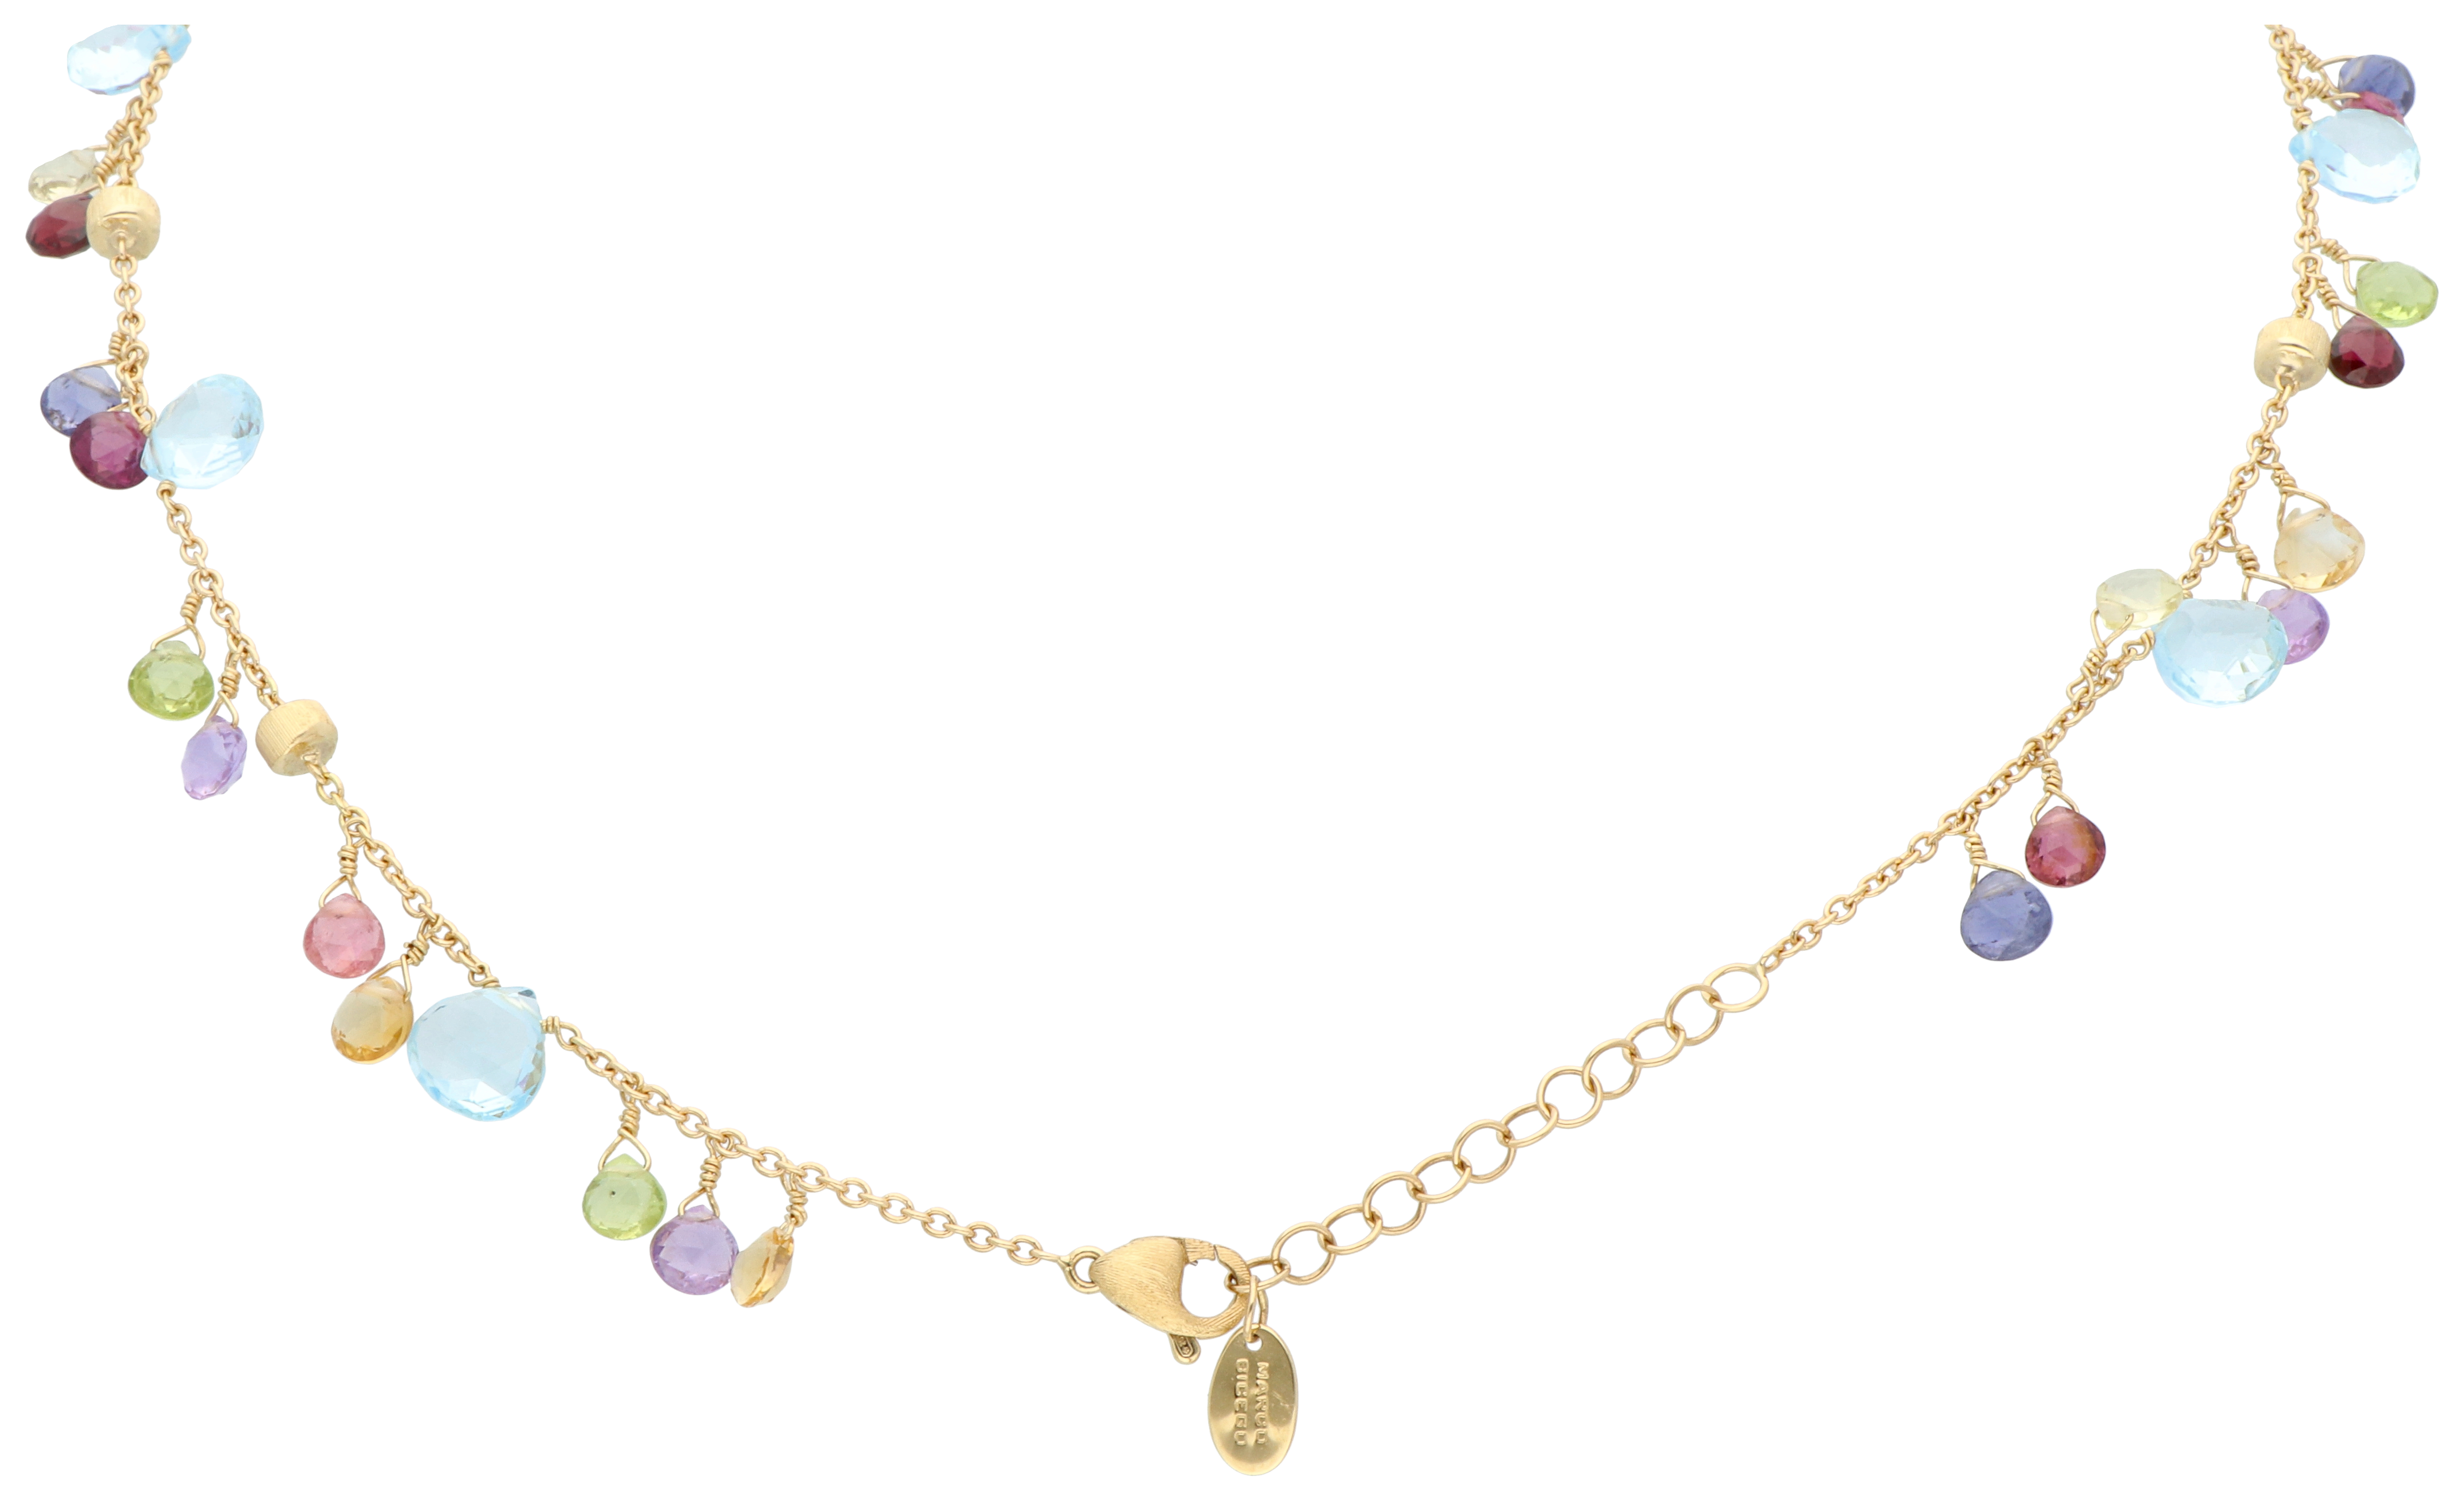 No Reserve - Marco Bicego 'Paradise' collection 18K yellow gold necklace with mix of gemstones - Image 2 of 5